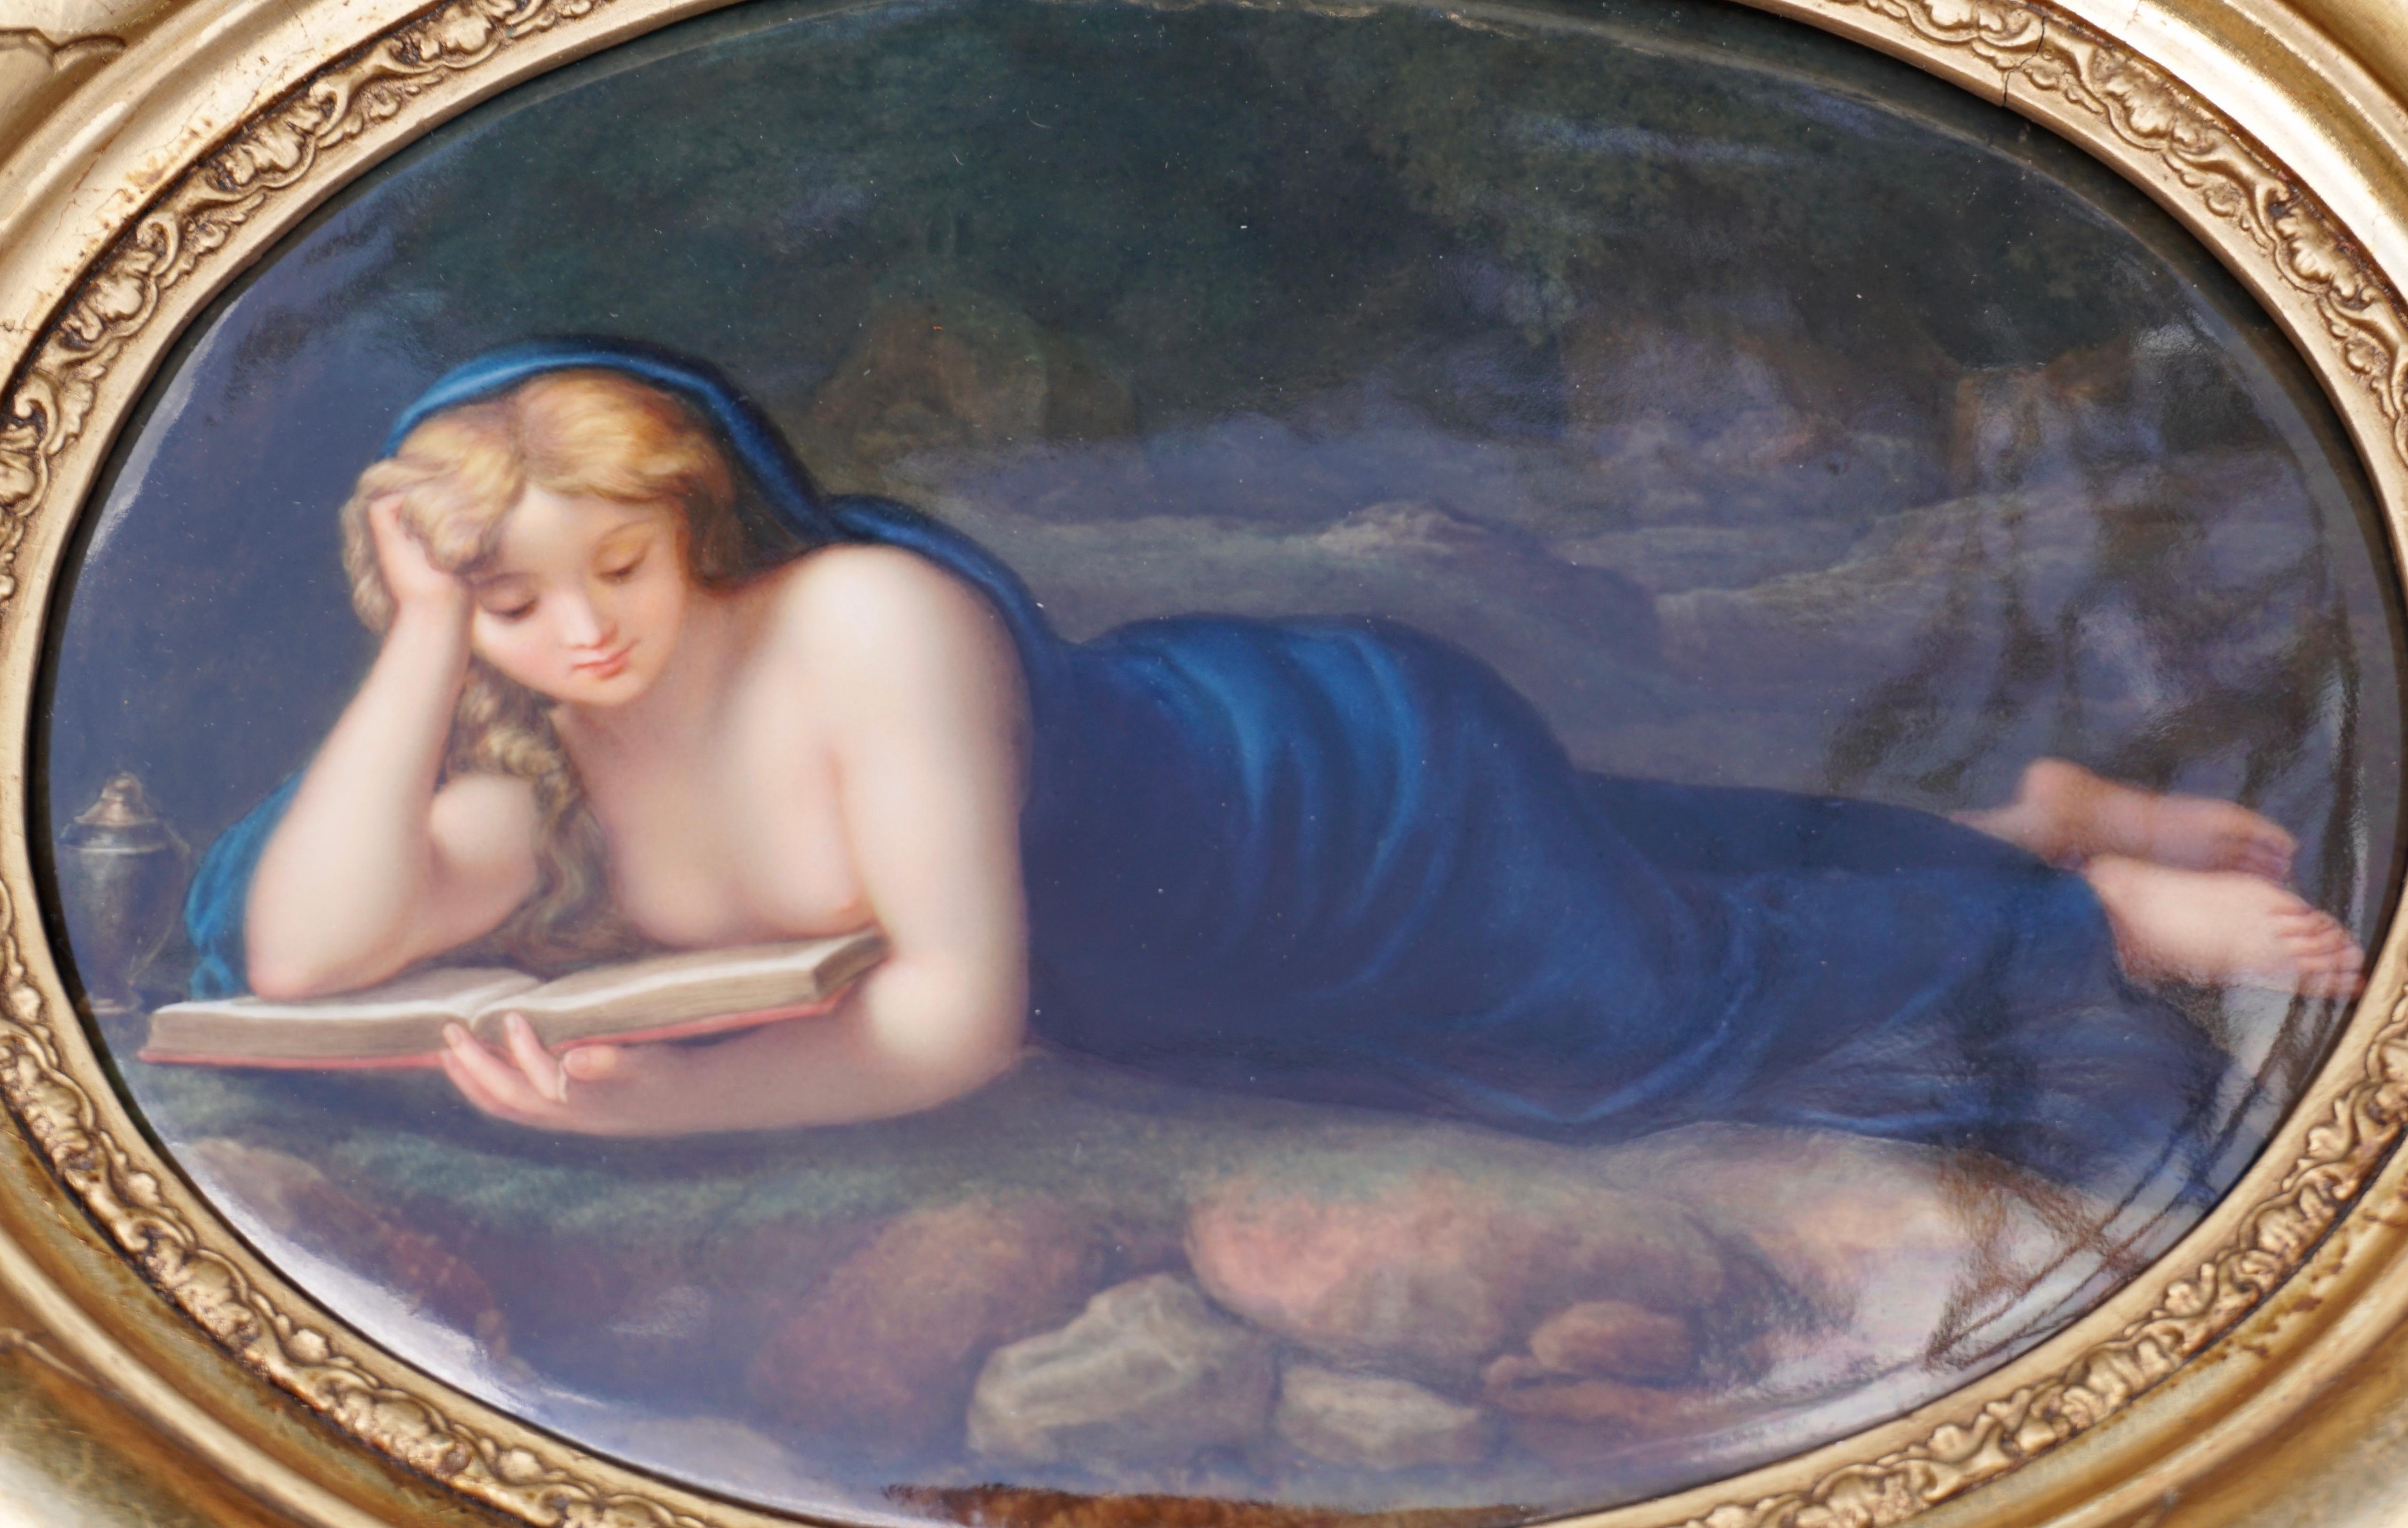 A stunning late 19th century Berlin KPM Porcelain plaque dating from circa 1887 of the penitent Magdalene after the paintings by Friedrich Heinrich Fuger and Correggio. A beautifully painted figure featuring Mary Magdalene lying outside against a